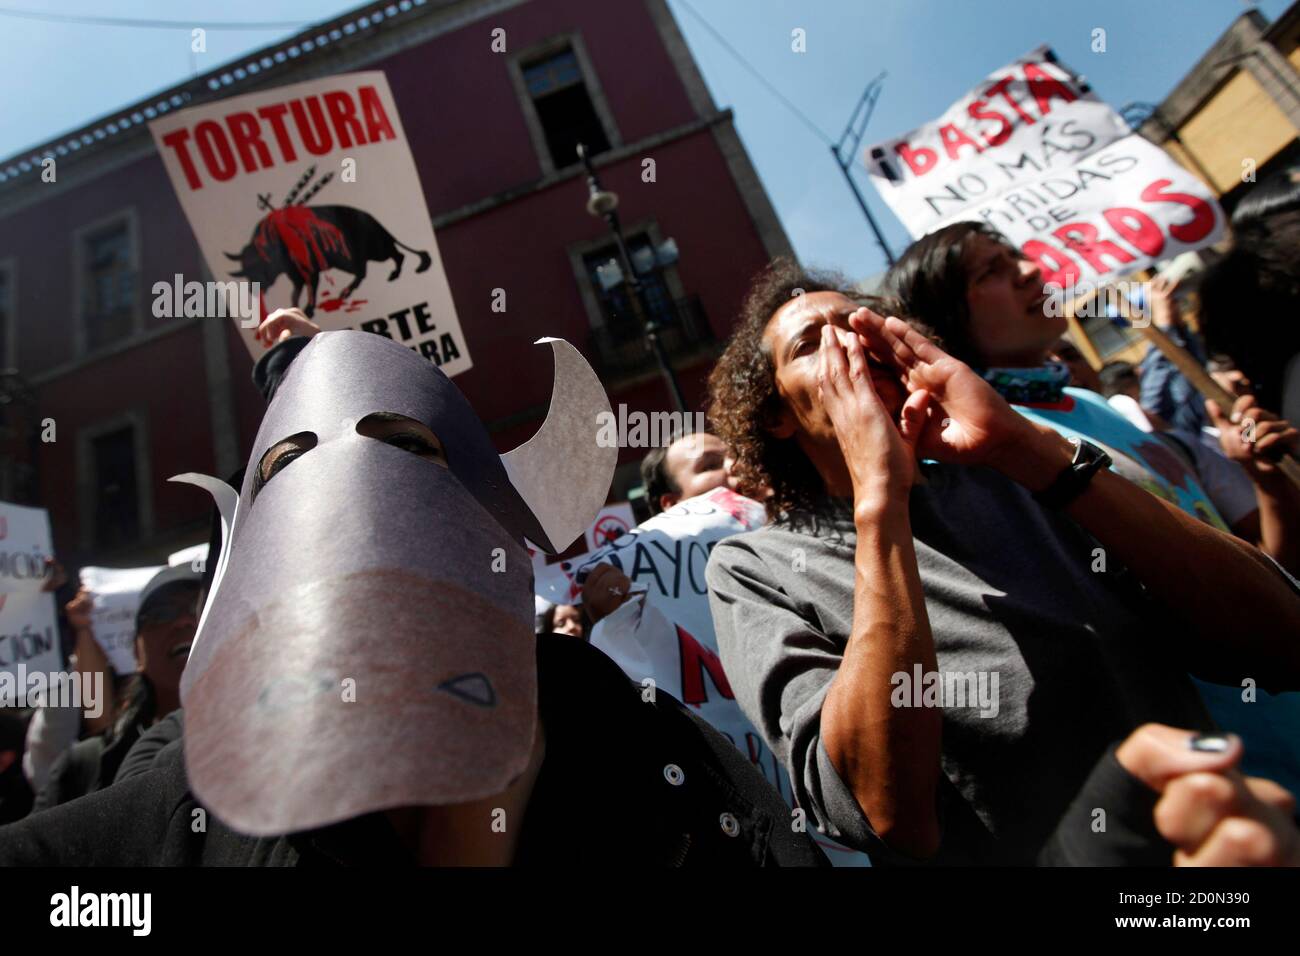 Activists protest against bullfighting outside the Legislative Assembly of the Federal District building in Mexico City, April 26, 2012. The Legislative Assembly of the Federal District will meet on Thursday to evaluate a legal reform to ban bullfighting in the country's capital.  REUTERS/Edgard Garrido  (MEXICO - Tags: ANIMALS CIVIL UNREST) Stock Photo